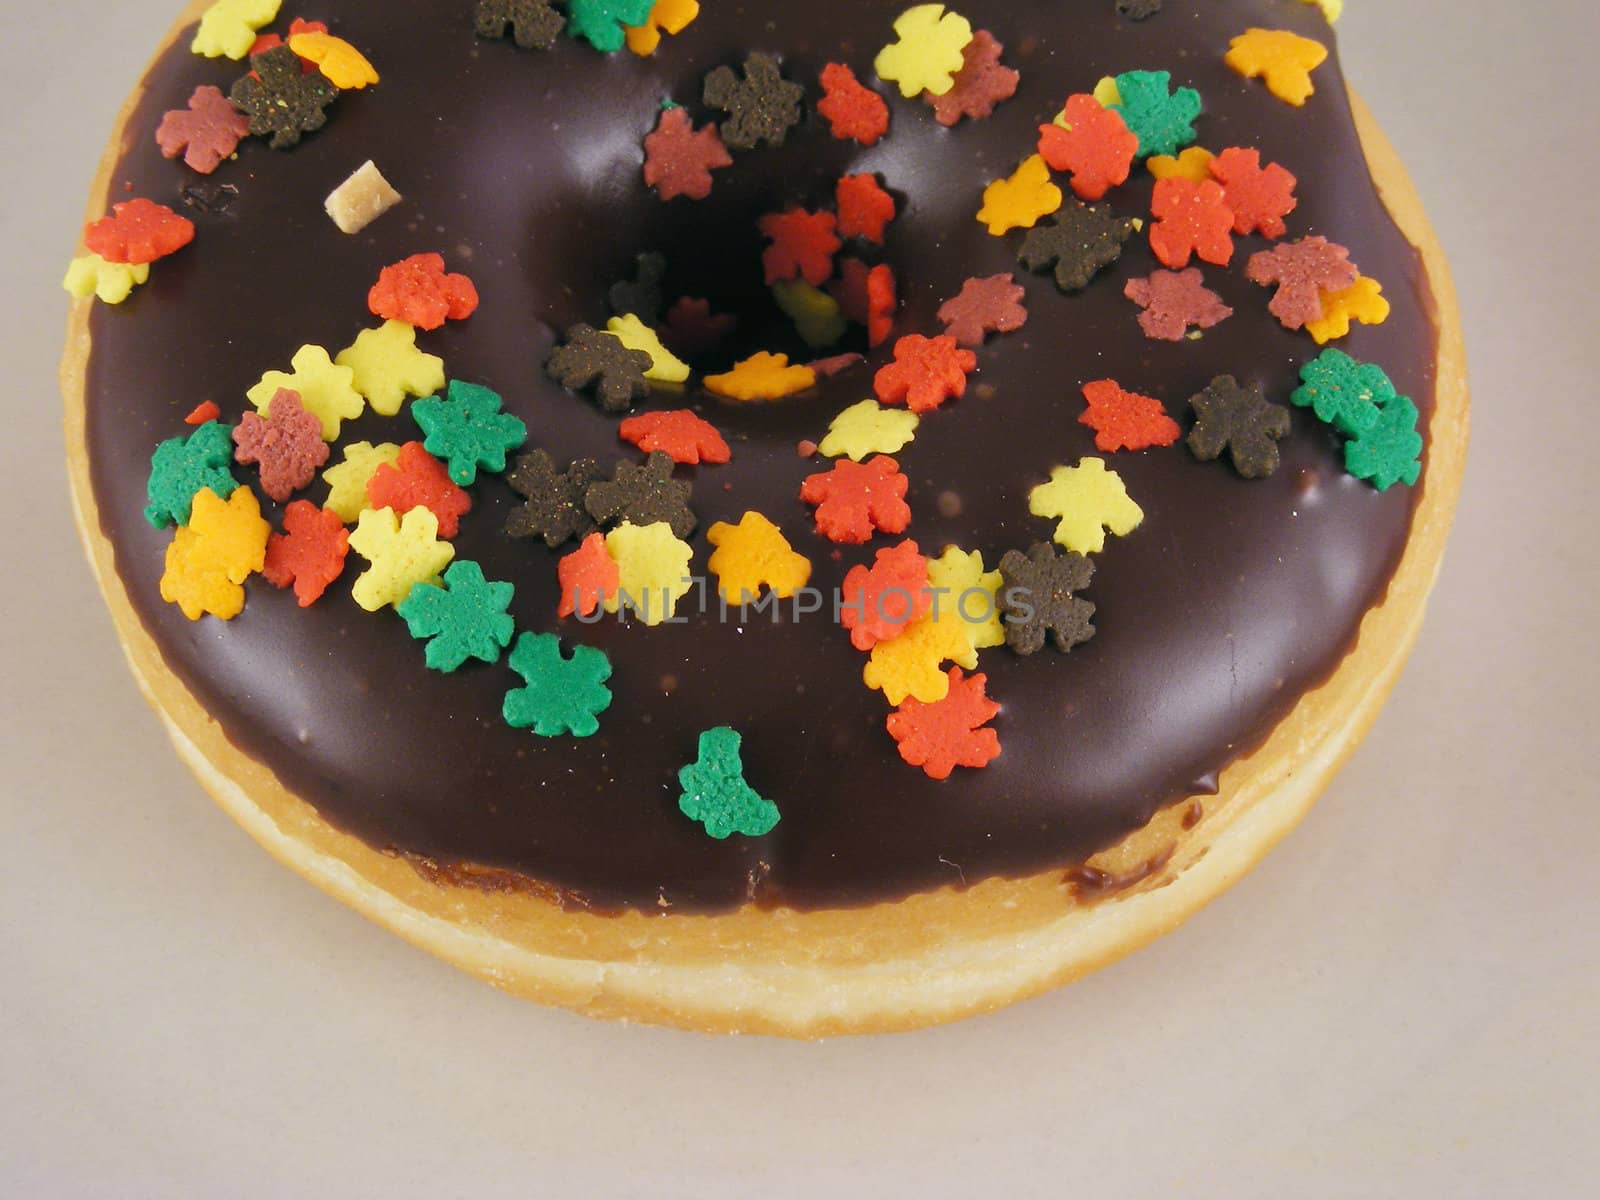 Chocoalte Iced Donut with Sprinkles by pywrit